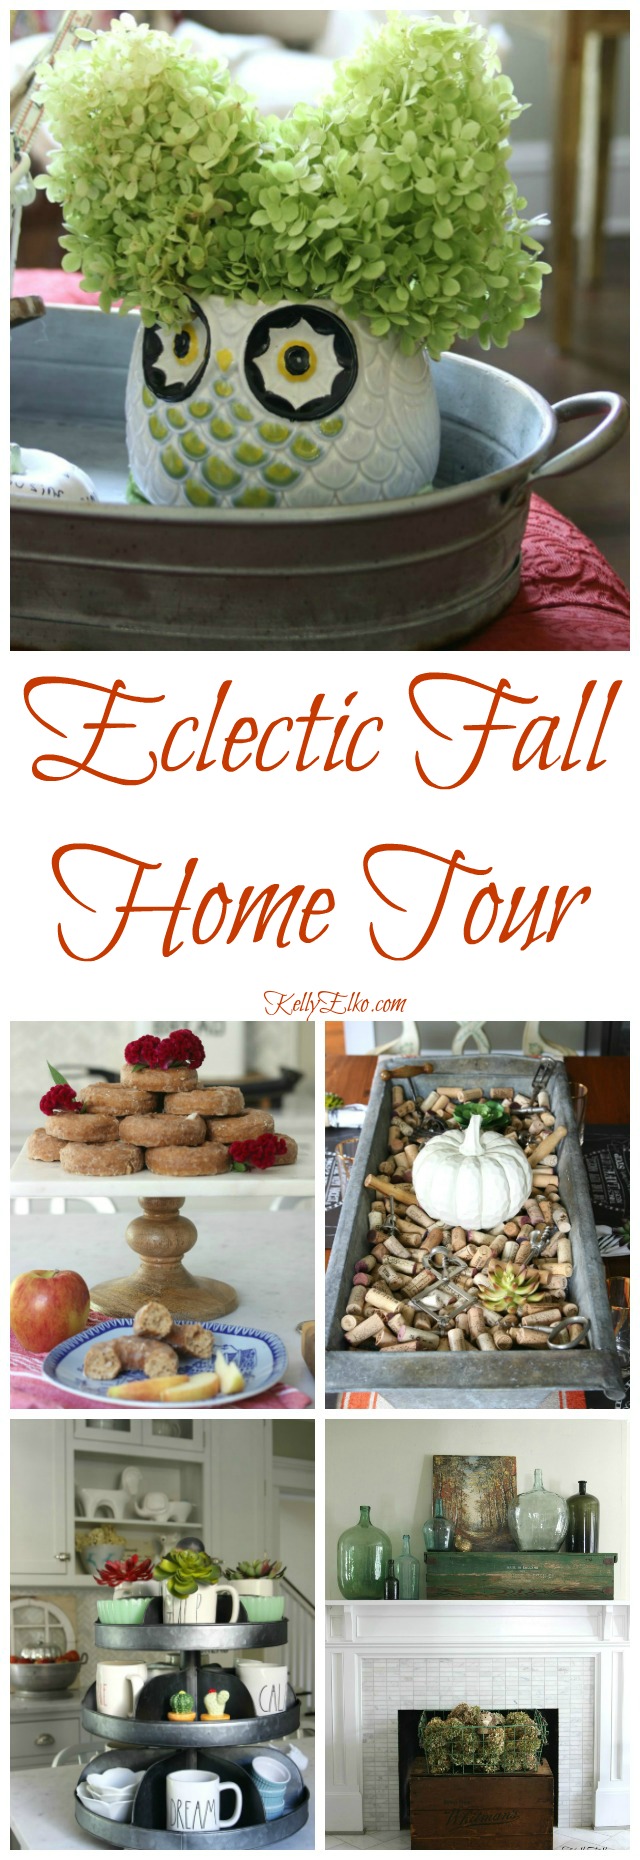 Eclectic Fall Home Tour - so many creative decorating ideas kellyelko.com